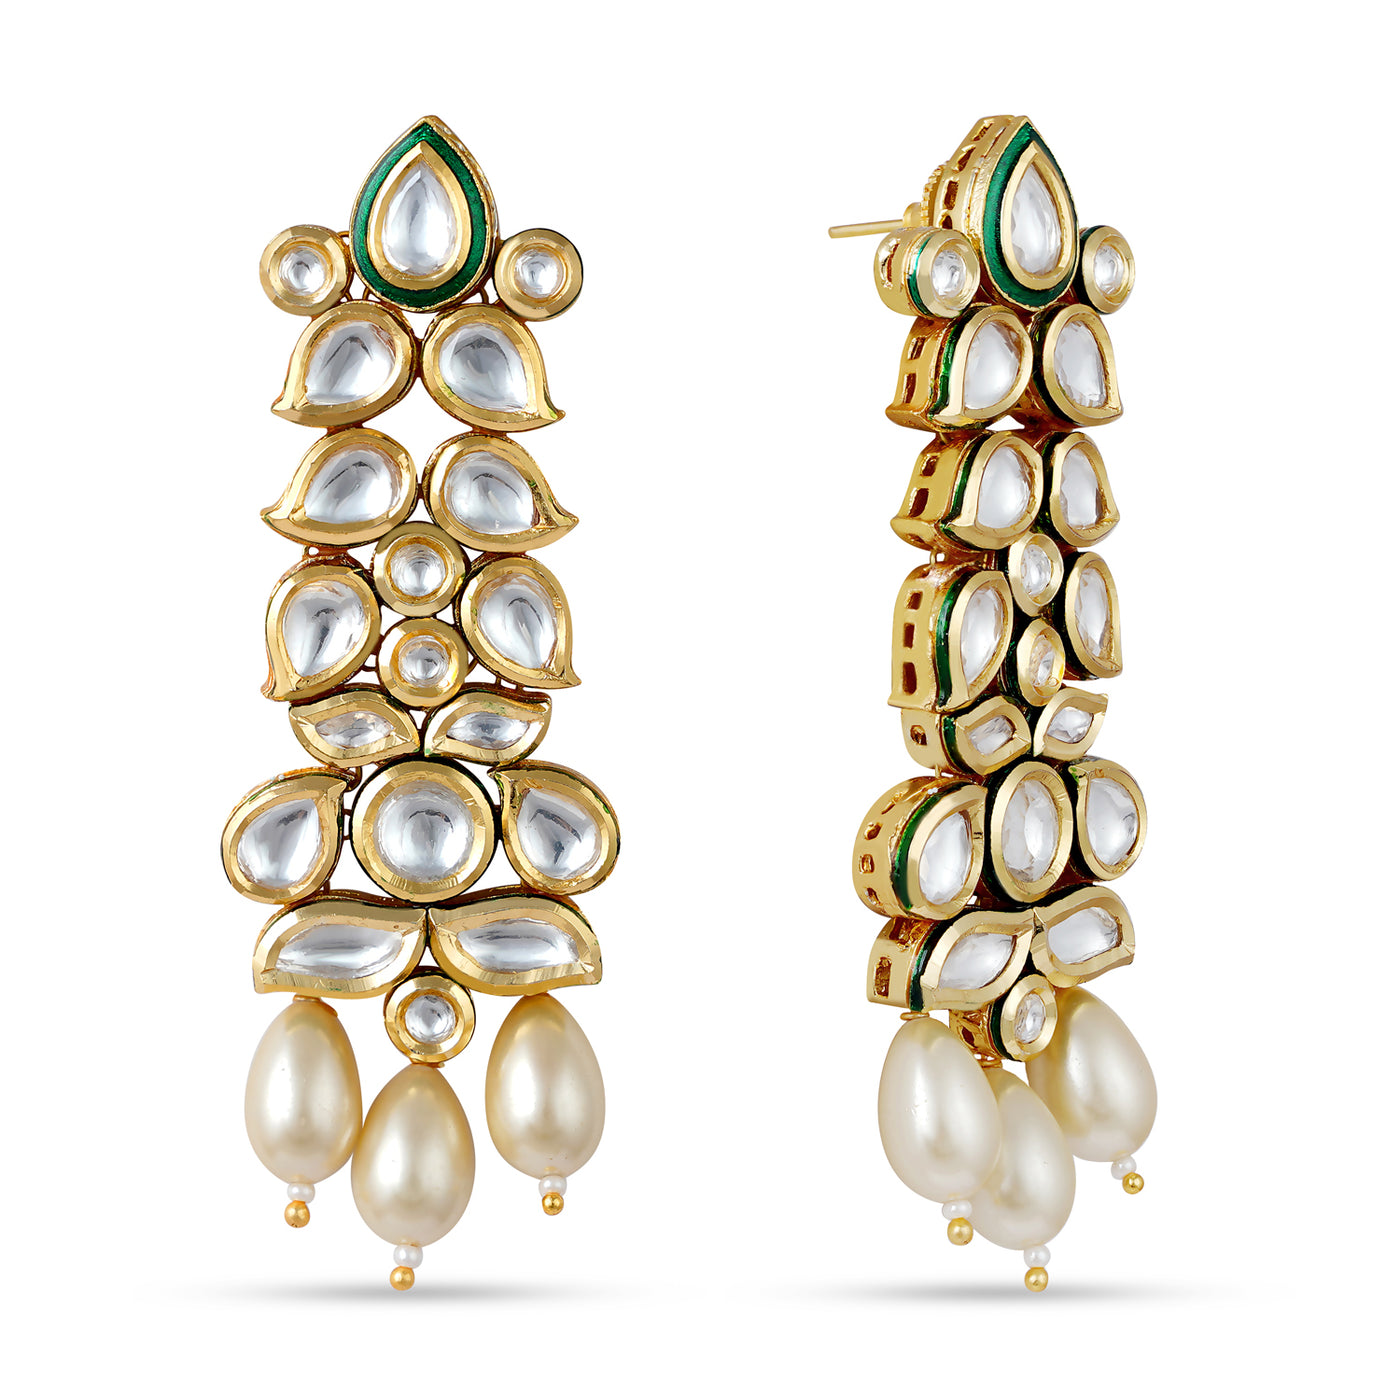 Classic Pearl Drop Kundan Dangle Earrings. Front View and Side View.